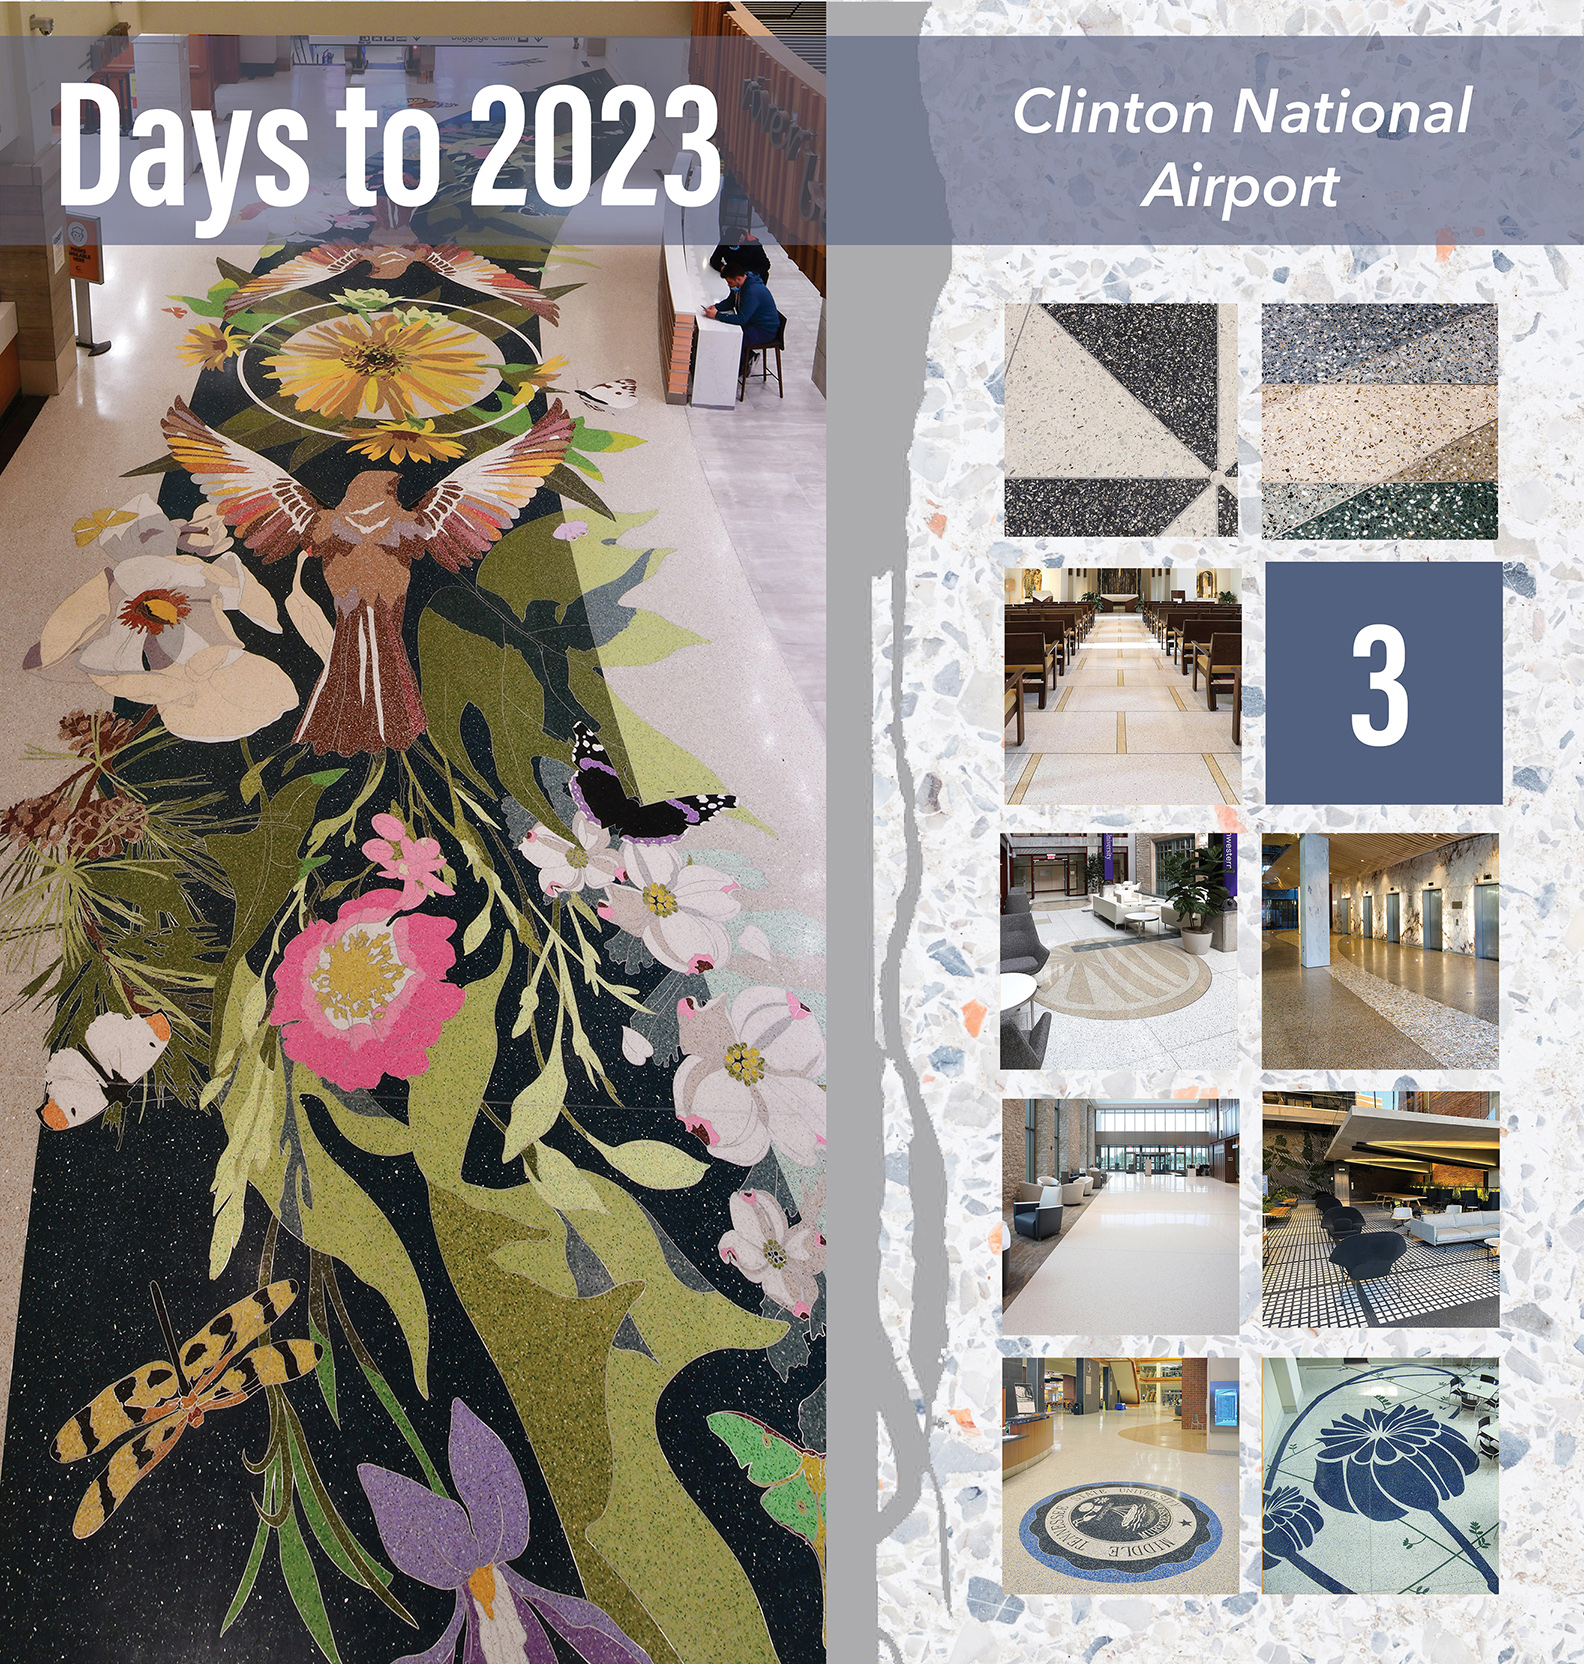 Countdown to 2023: Top 10 Terrazzo Projects